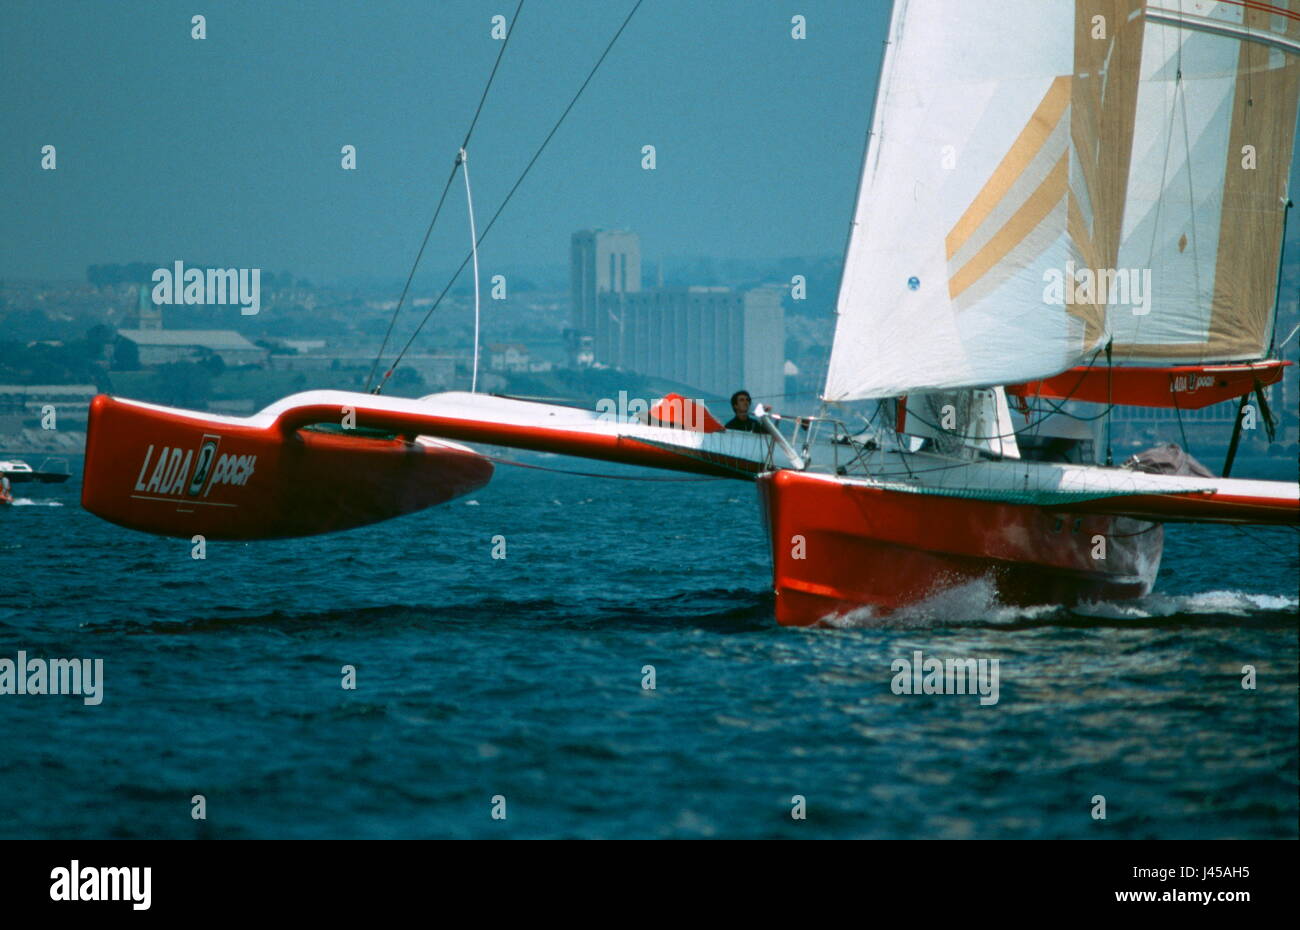 AJAX NEWS PHOTOS.10TH JUNE, 1990. PLYMOUTH, ENGLAND. - ROYAL WESTERN TWO HANDED TRANSATLANTIC RACE - LOICK PEYRON SKIPPERED LADA POCH IV WITH CREW JACQUES DELORME, SEEN HERE AT RACE START. 60FT TRIMARAN RETIRED TO FRANCE WITH BROKEN DAGGERBOARD. PHOTO:JONATHAN EASTLAND/AJAX REF:60305_38 Stock Photo